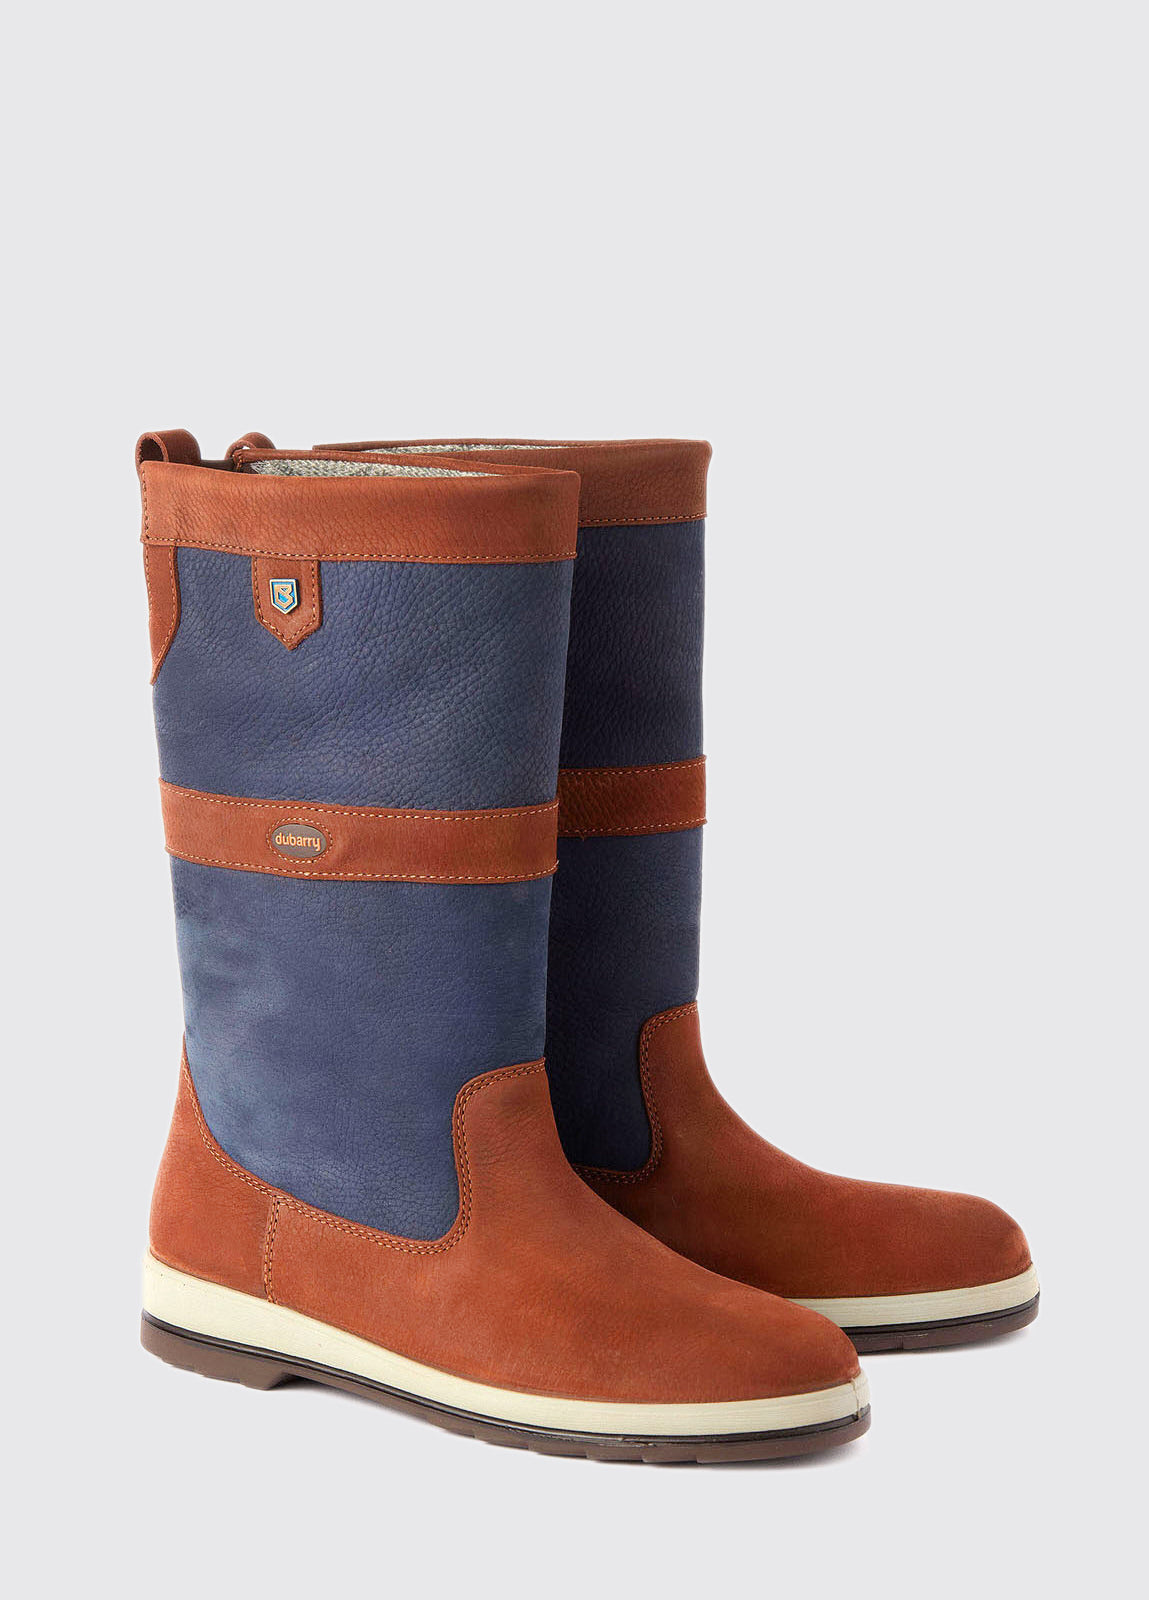 Dubarry Ultima Leather Sailing Boots - Brown, Navy/Brown, Black | Marine